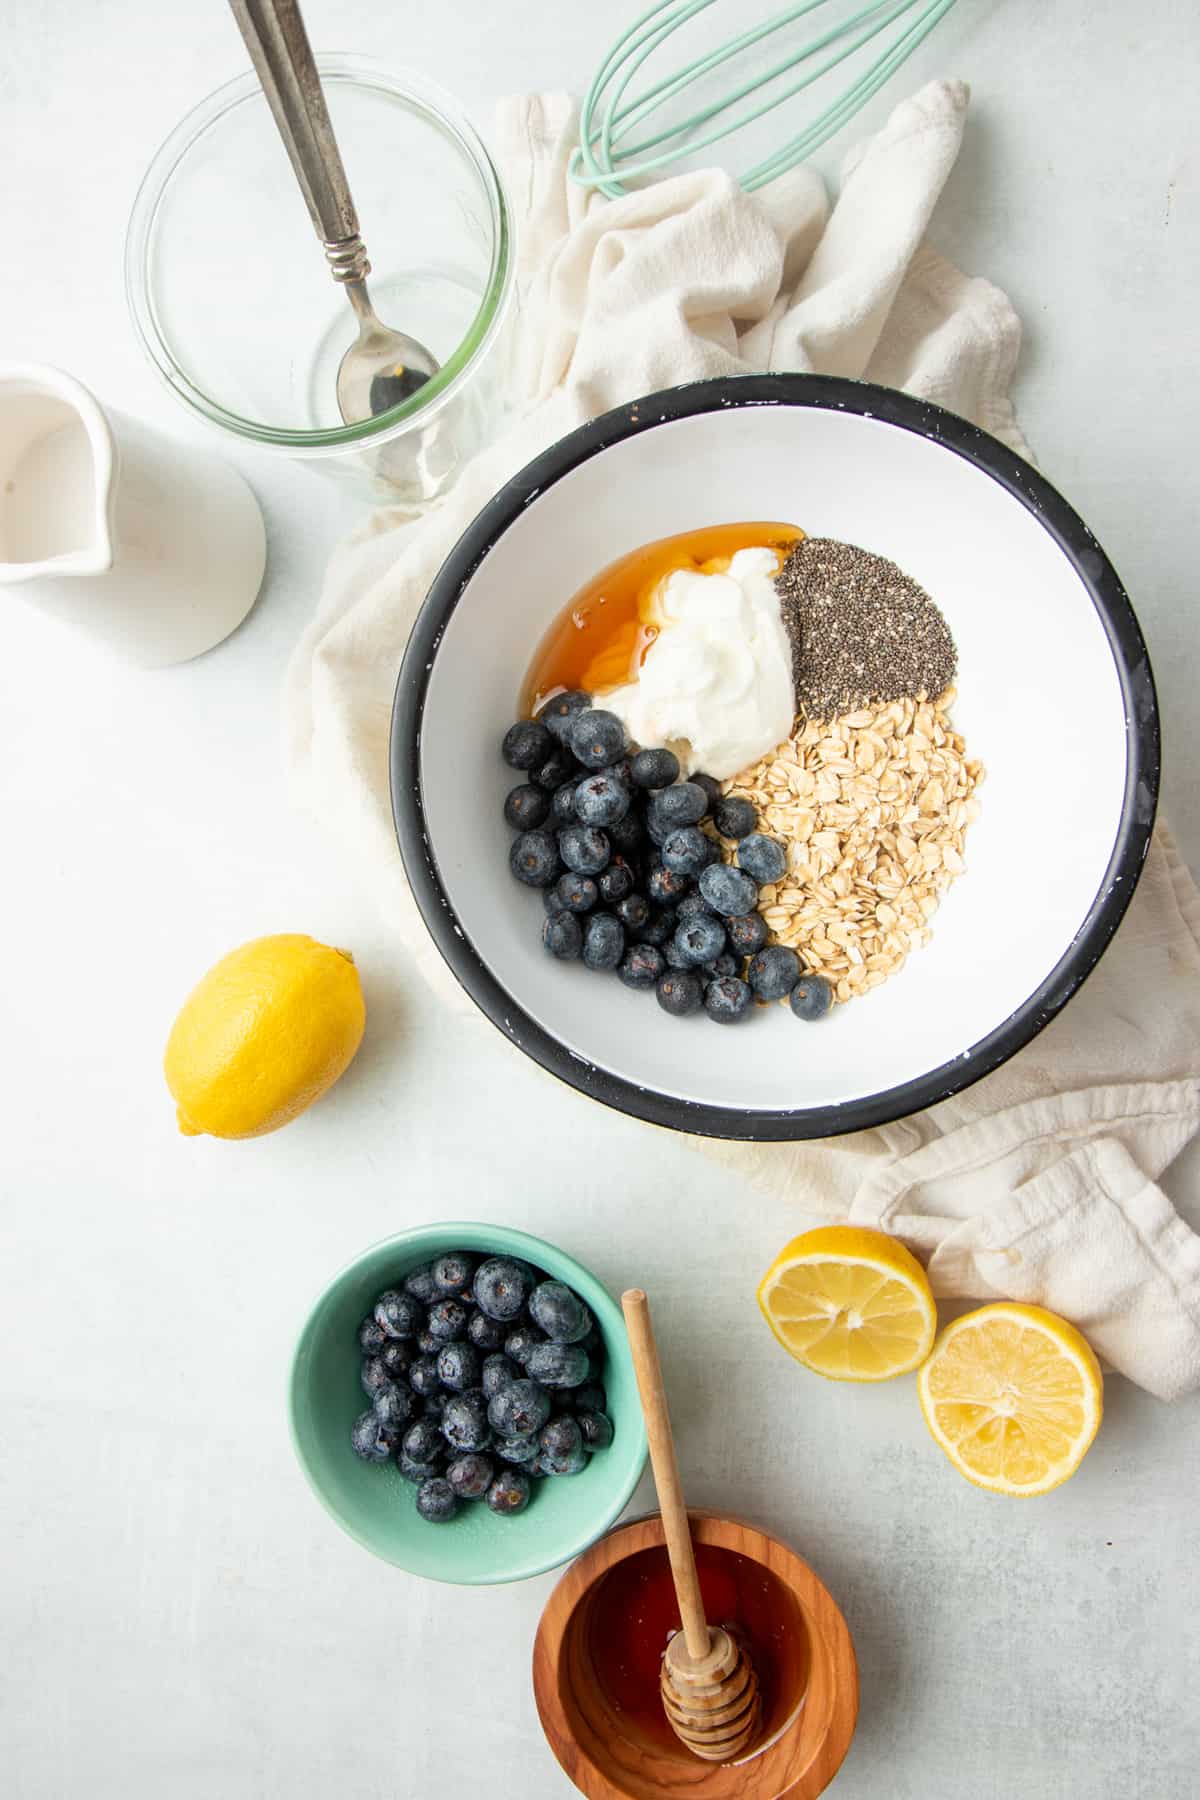 A mixing bowl filled with blueberries, oats, Greek yogurt, chia seeds, and other ingredients sits next to a halved lemon.